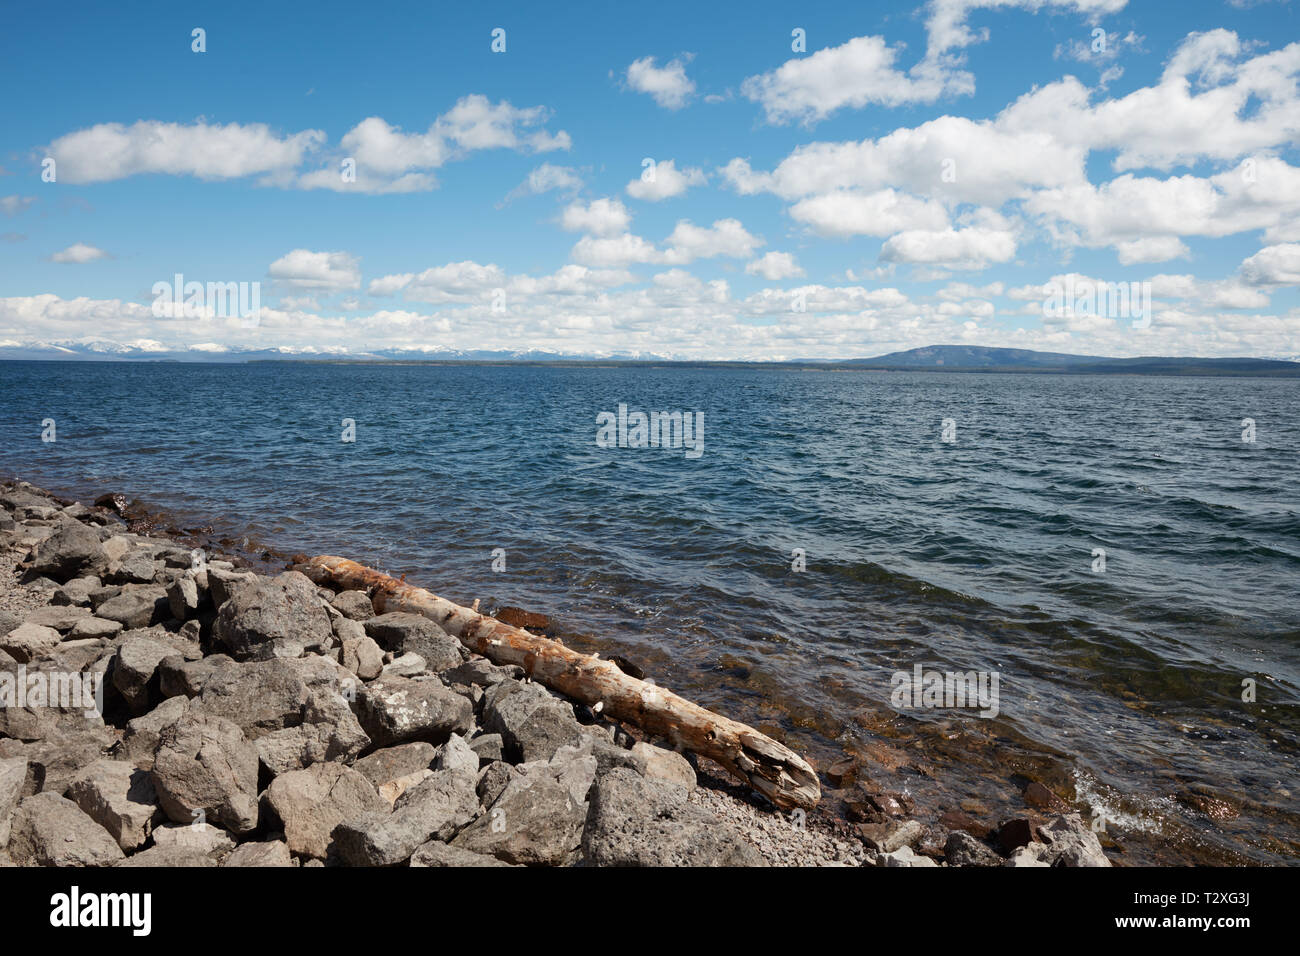 Yellowstone Lake Rocks High Resolution Stock Photography and Images - Alamy